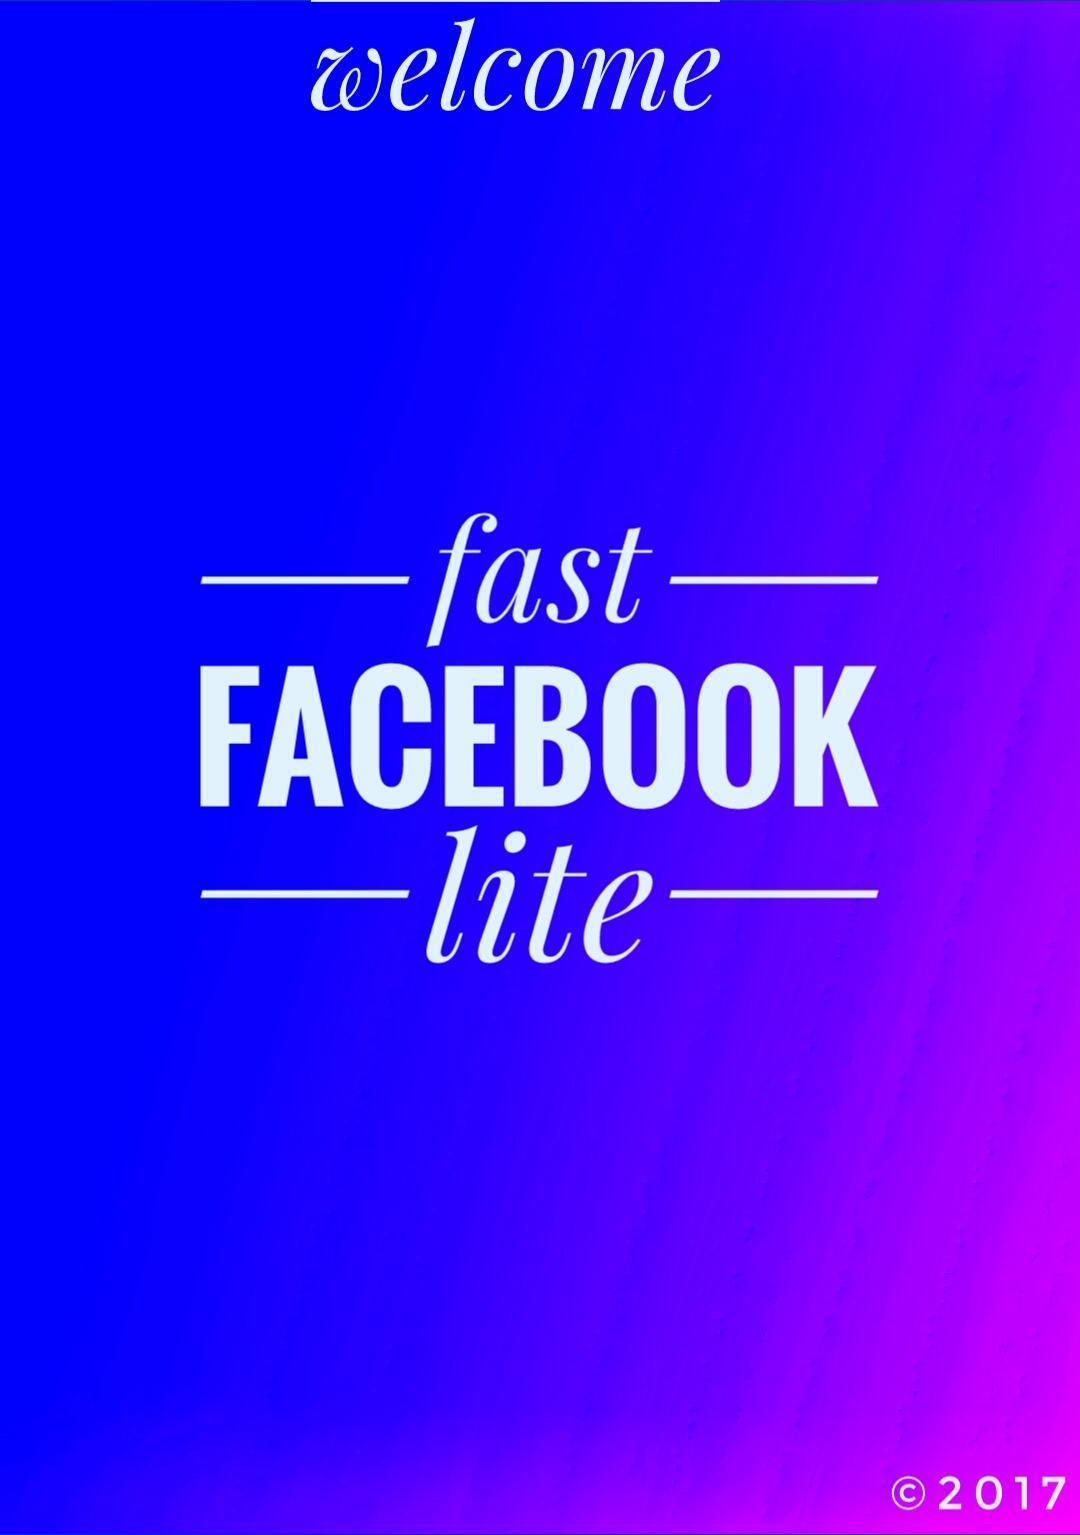 Fast facebook lite for Android - APK Download